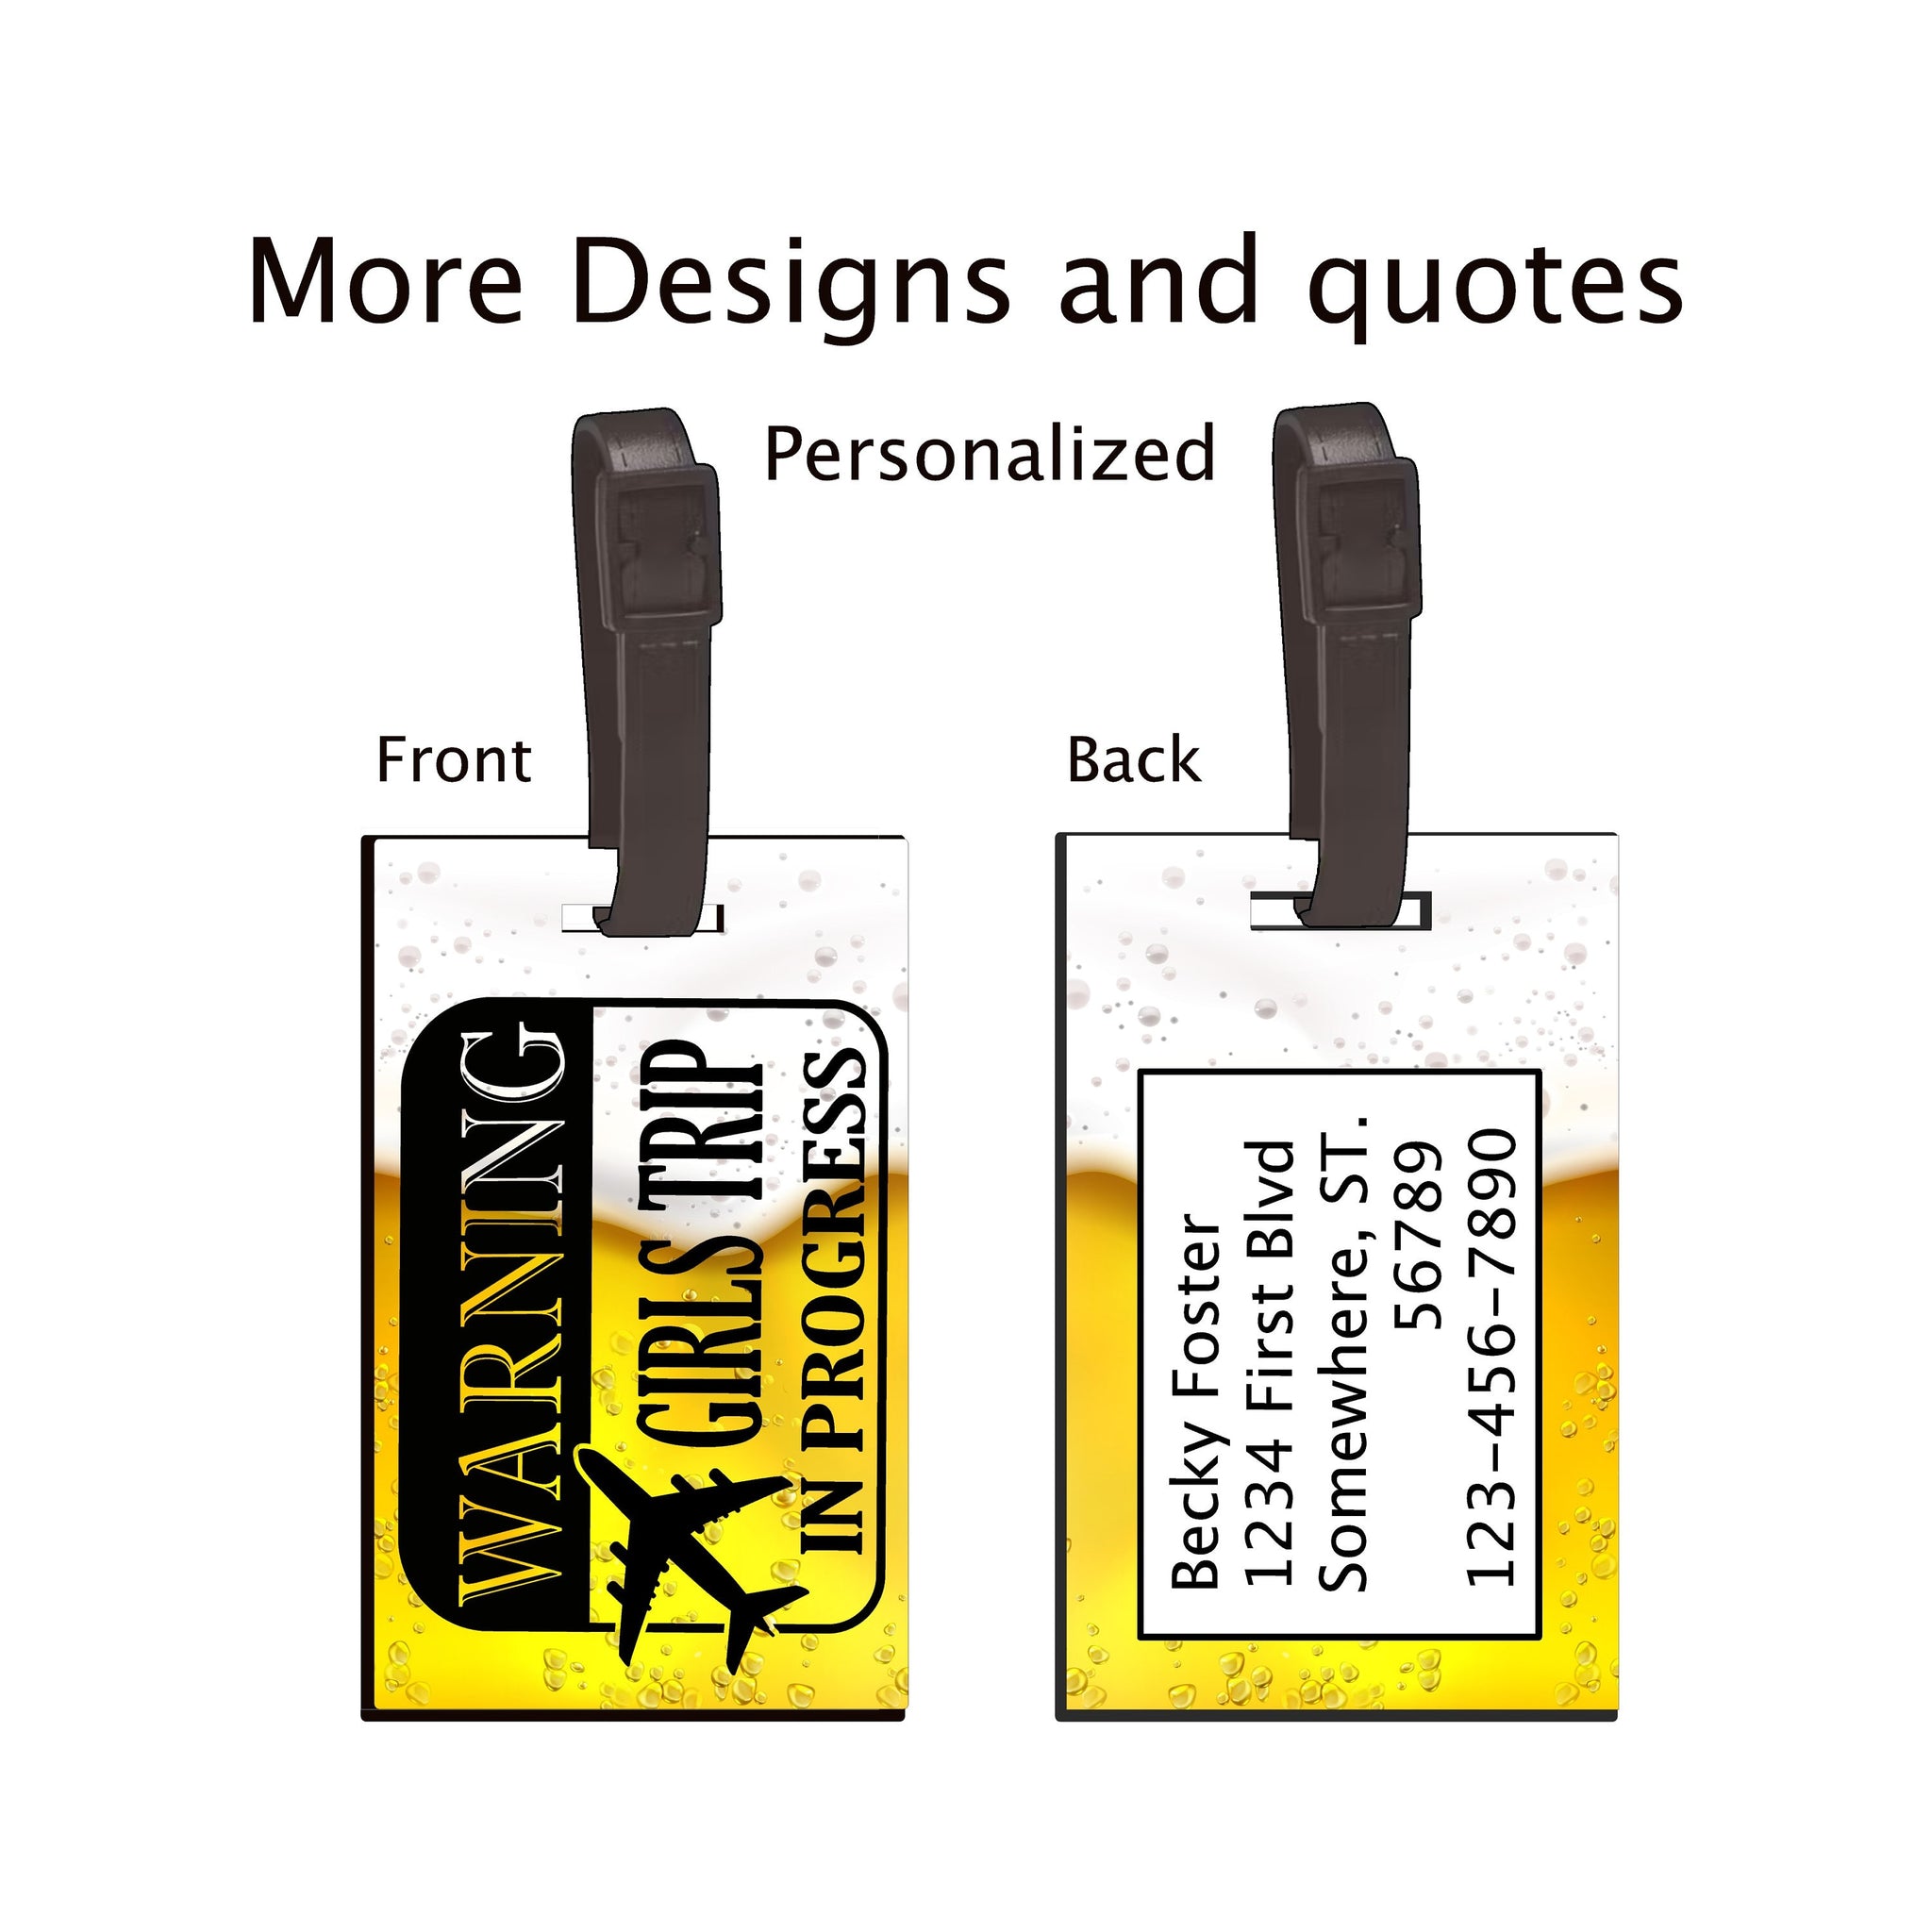 Girls Trip Bag Tag, Luggage Tags, Identification Tag, Best Friends Gift, Travel Label